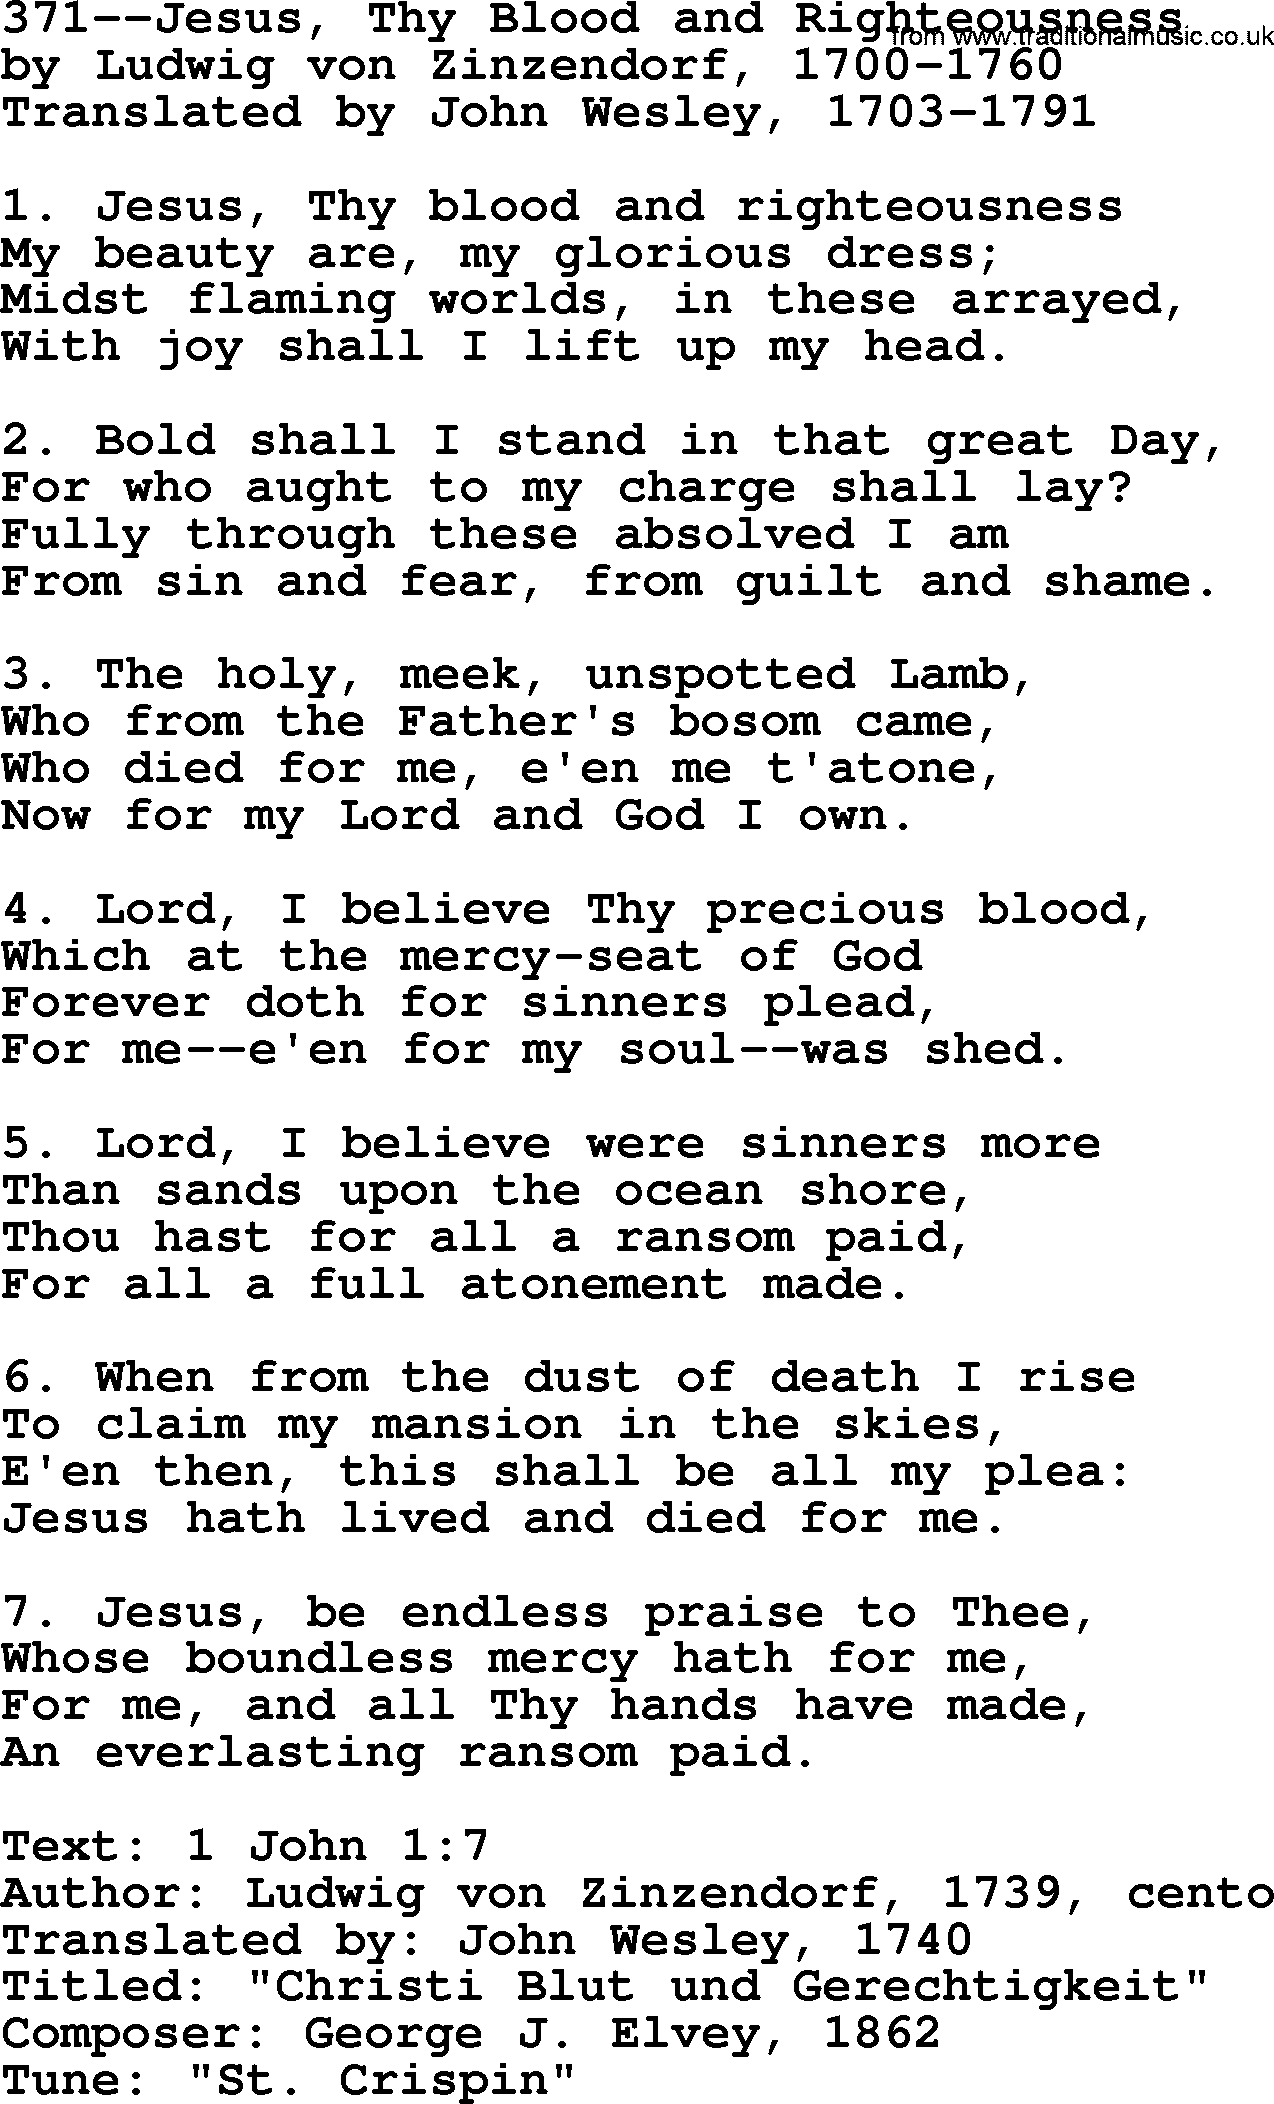 Lutheran Hymn: 371--Jesus, Thy Blood and Righteousness.txt lyrics with PDF